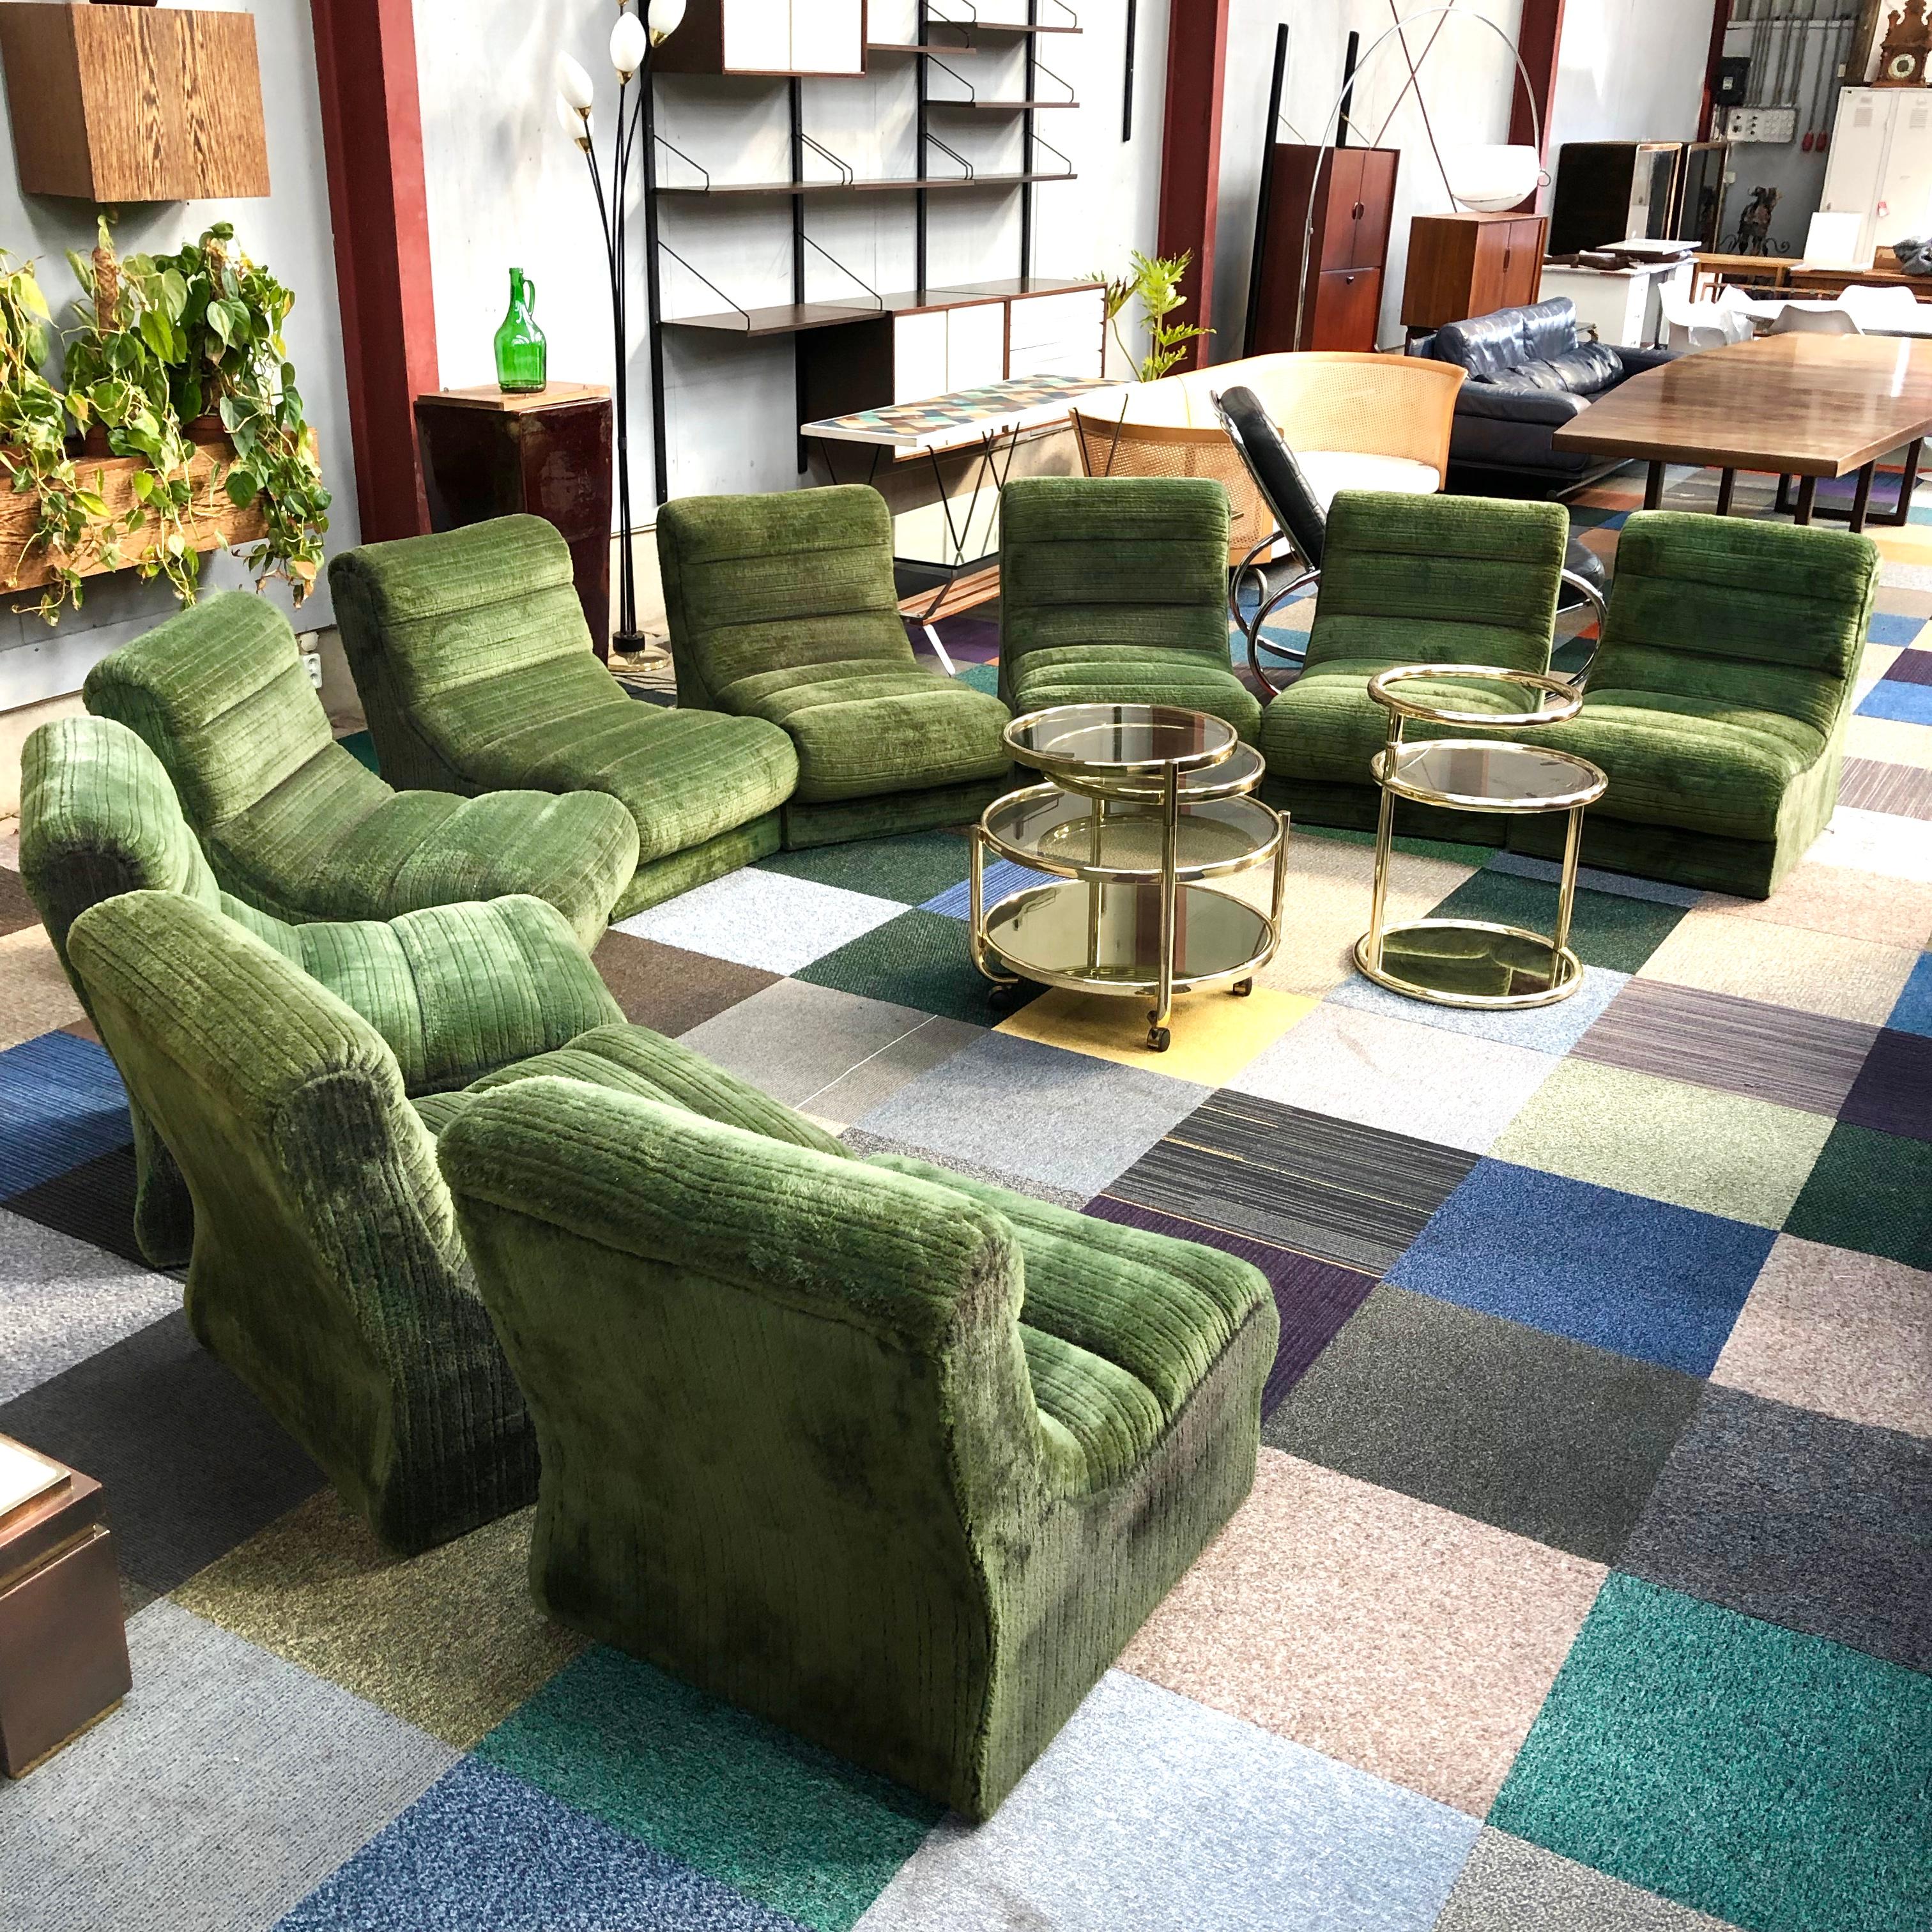 Italian sectional sofa in green plush – Italy, 1970s.
Can also be used as lounge chairs.

9 sections available.

Designer: Unknown

Manufacturer: Unknown

Country: Italy

Model: Sectional sofa (9 sections available)

Design period: